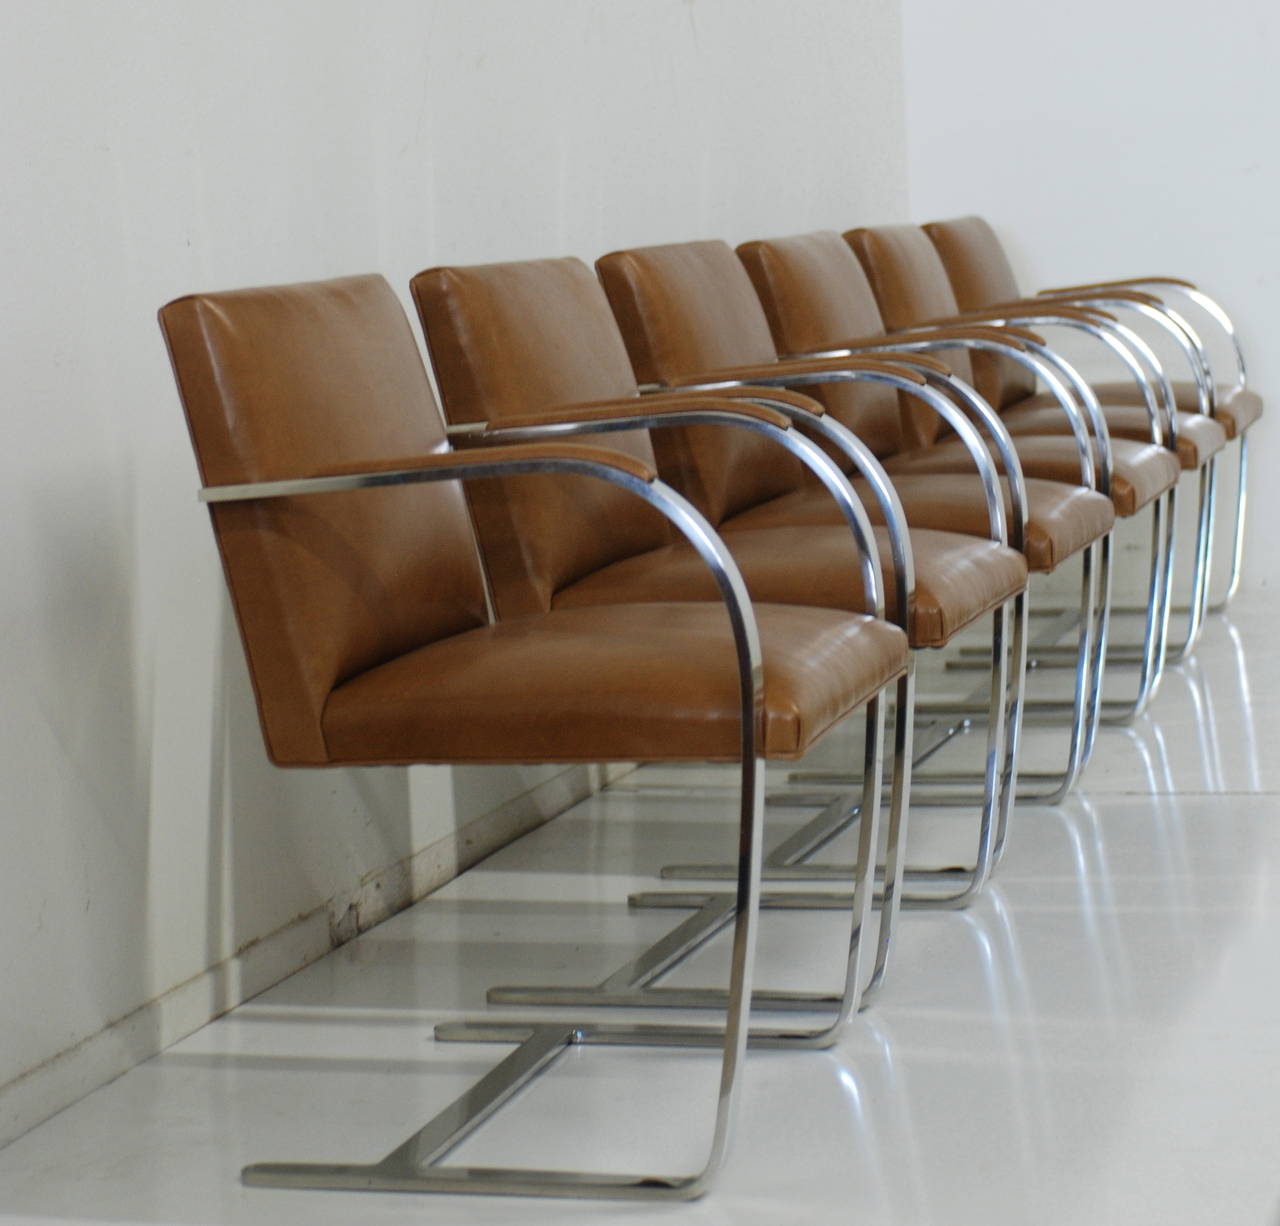 These vintage Classic Ludwig Mies van der Rohe designed Brno chairs have been expertly reupholstered in a caramel colored leather. These are substantial, heavy and in excellent vintage ready to go condition. The height of the arm is 26